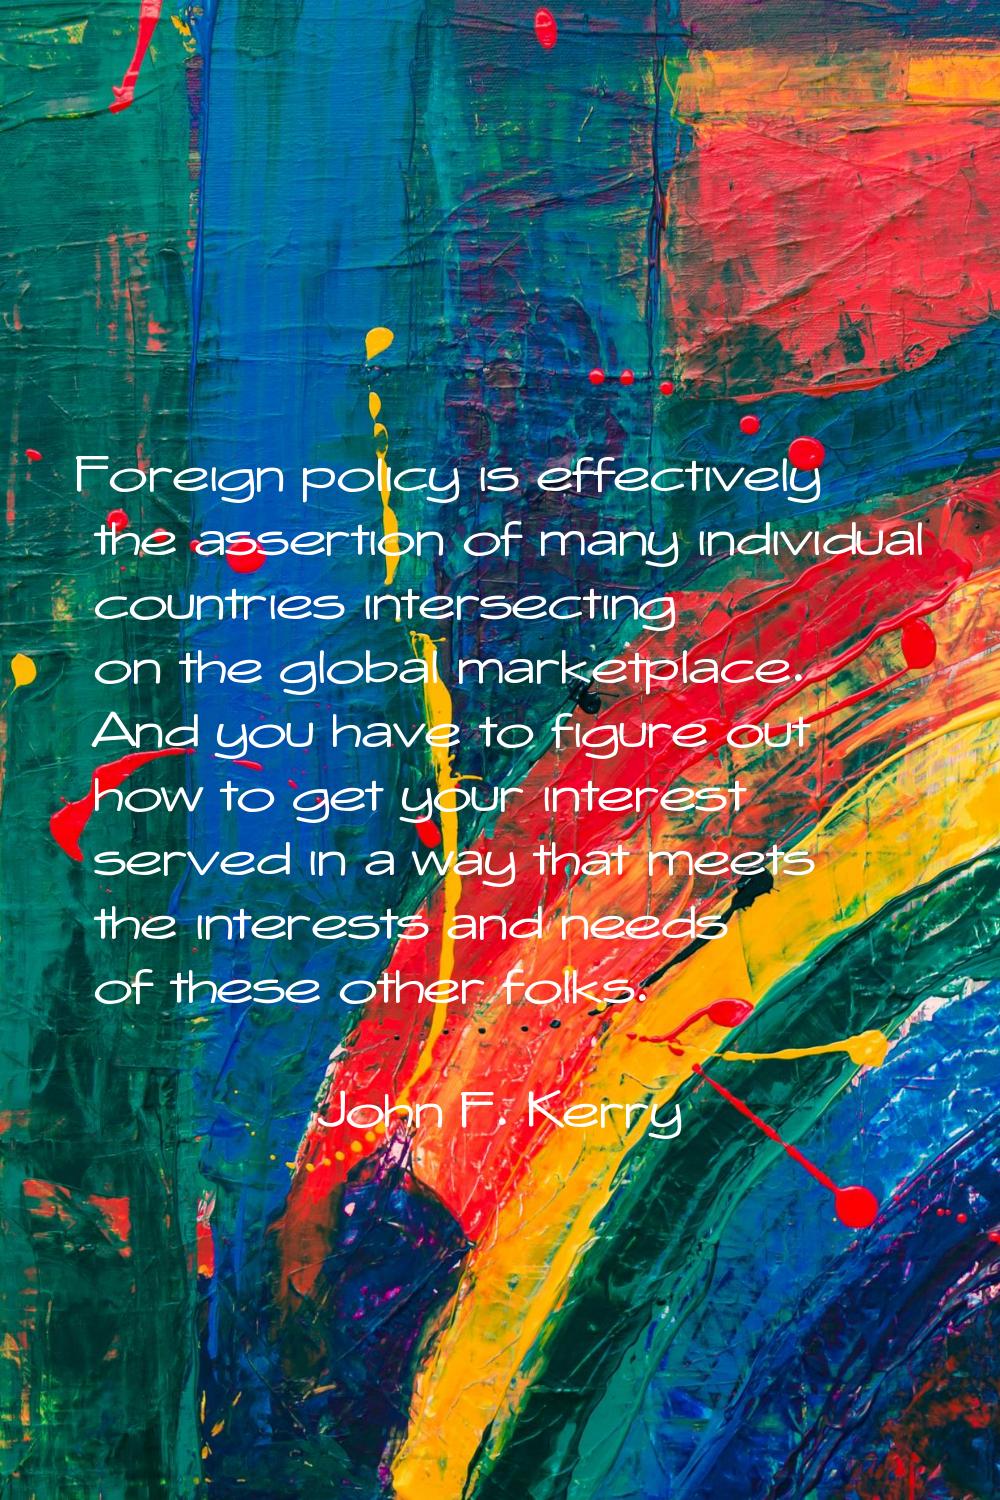 Foreign policy is effectively the assertion of many individual countries intersecting on the global